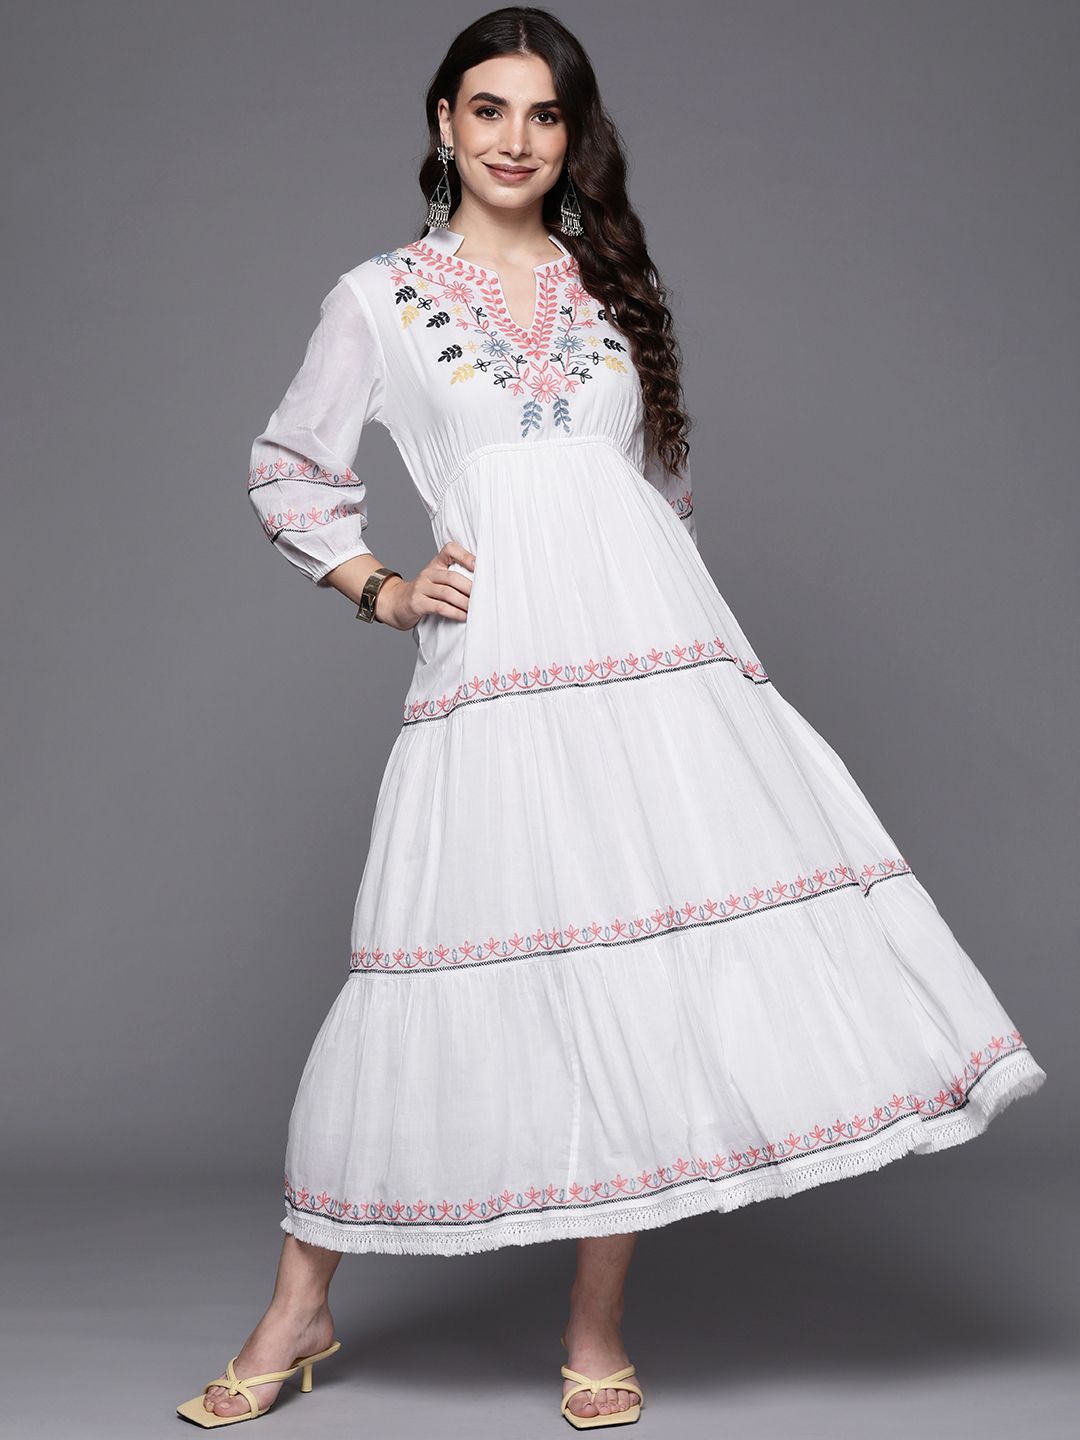 Indo Era White Floral Embroidered Ethnic A-Line Dress Price in India